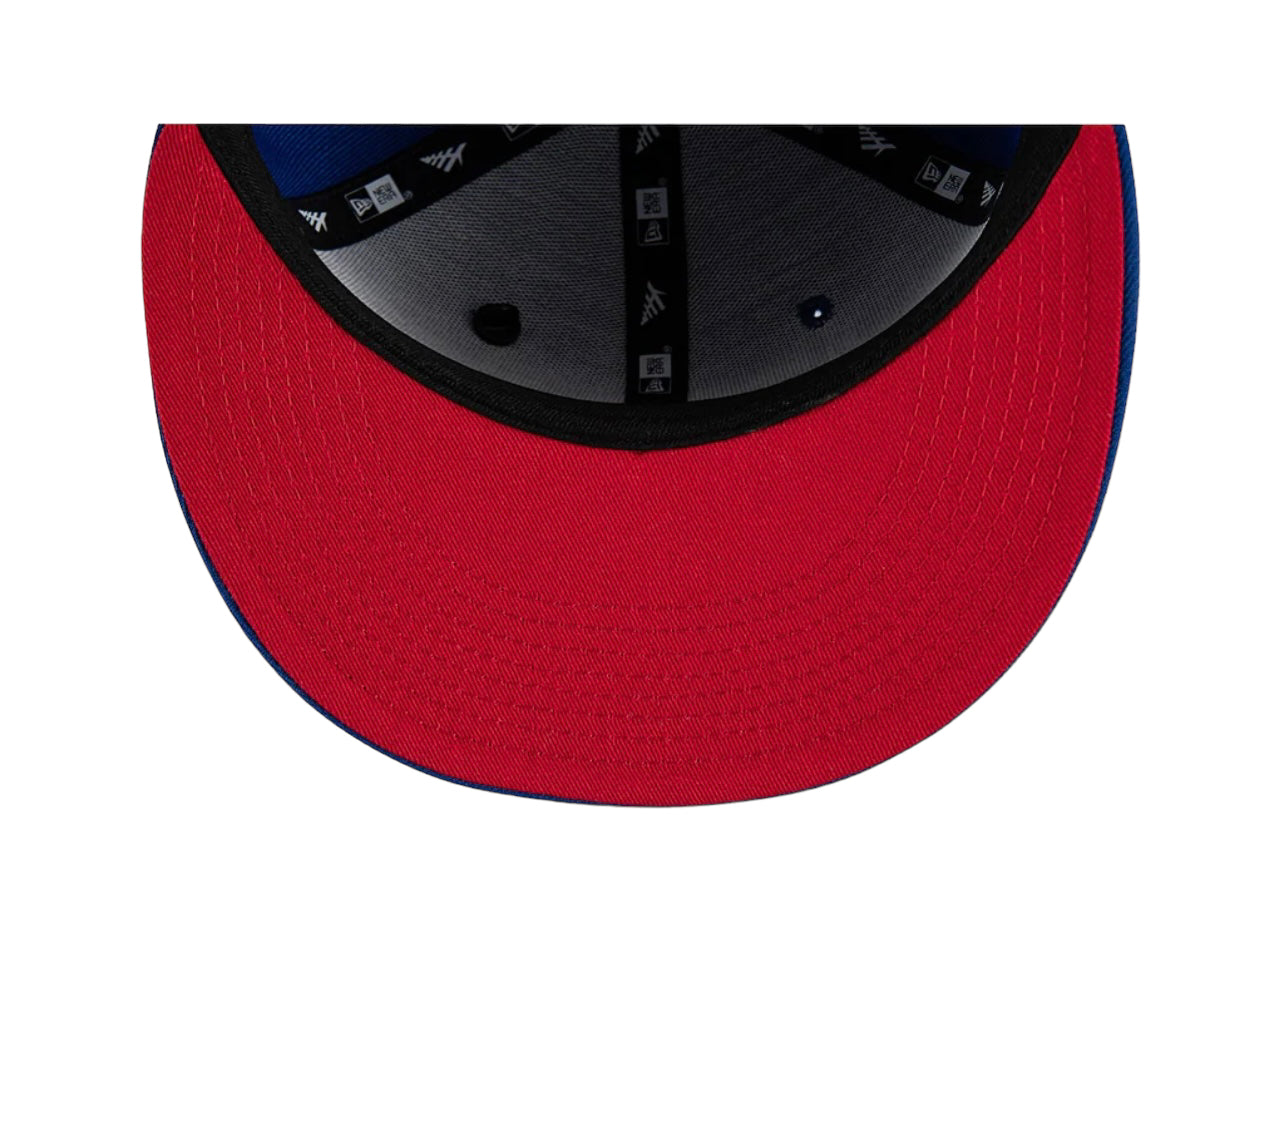 PAPER PLANES X NEW YORK GIANTS 59FIFTY FITTED